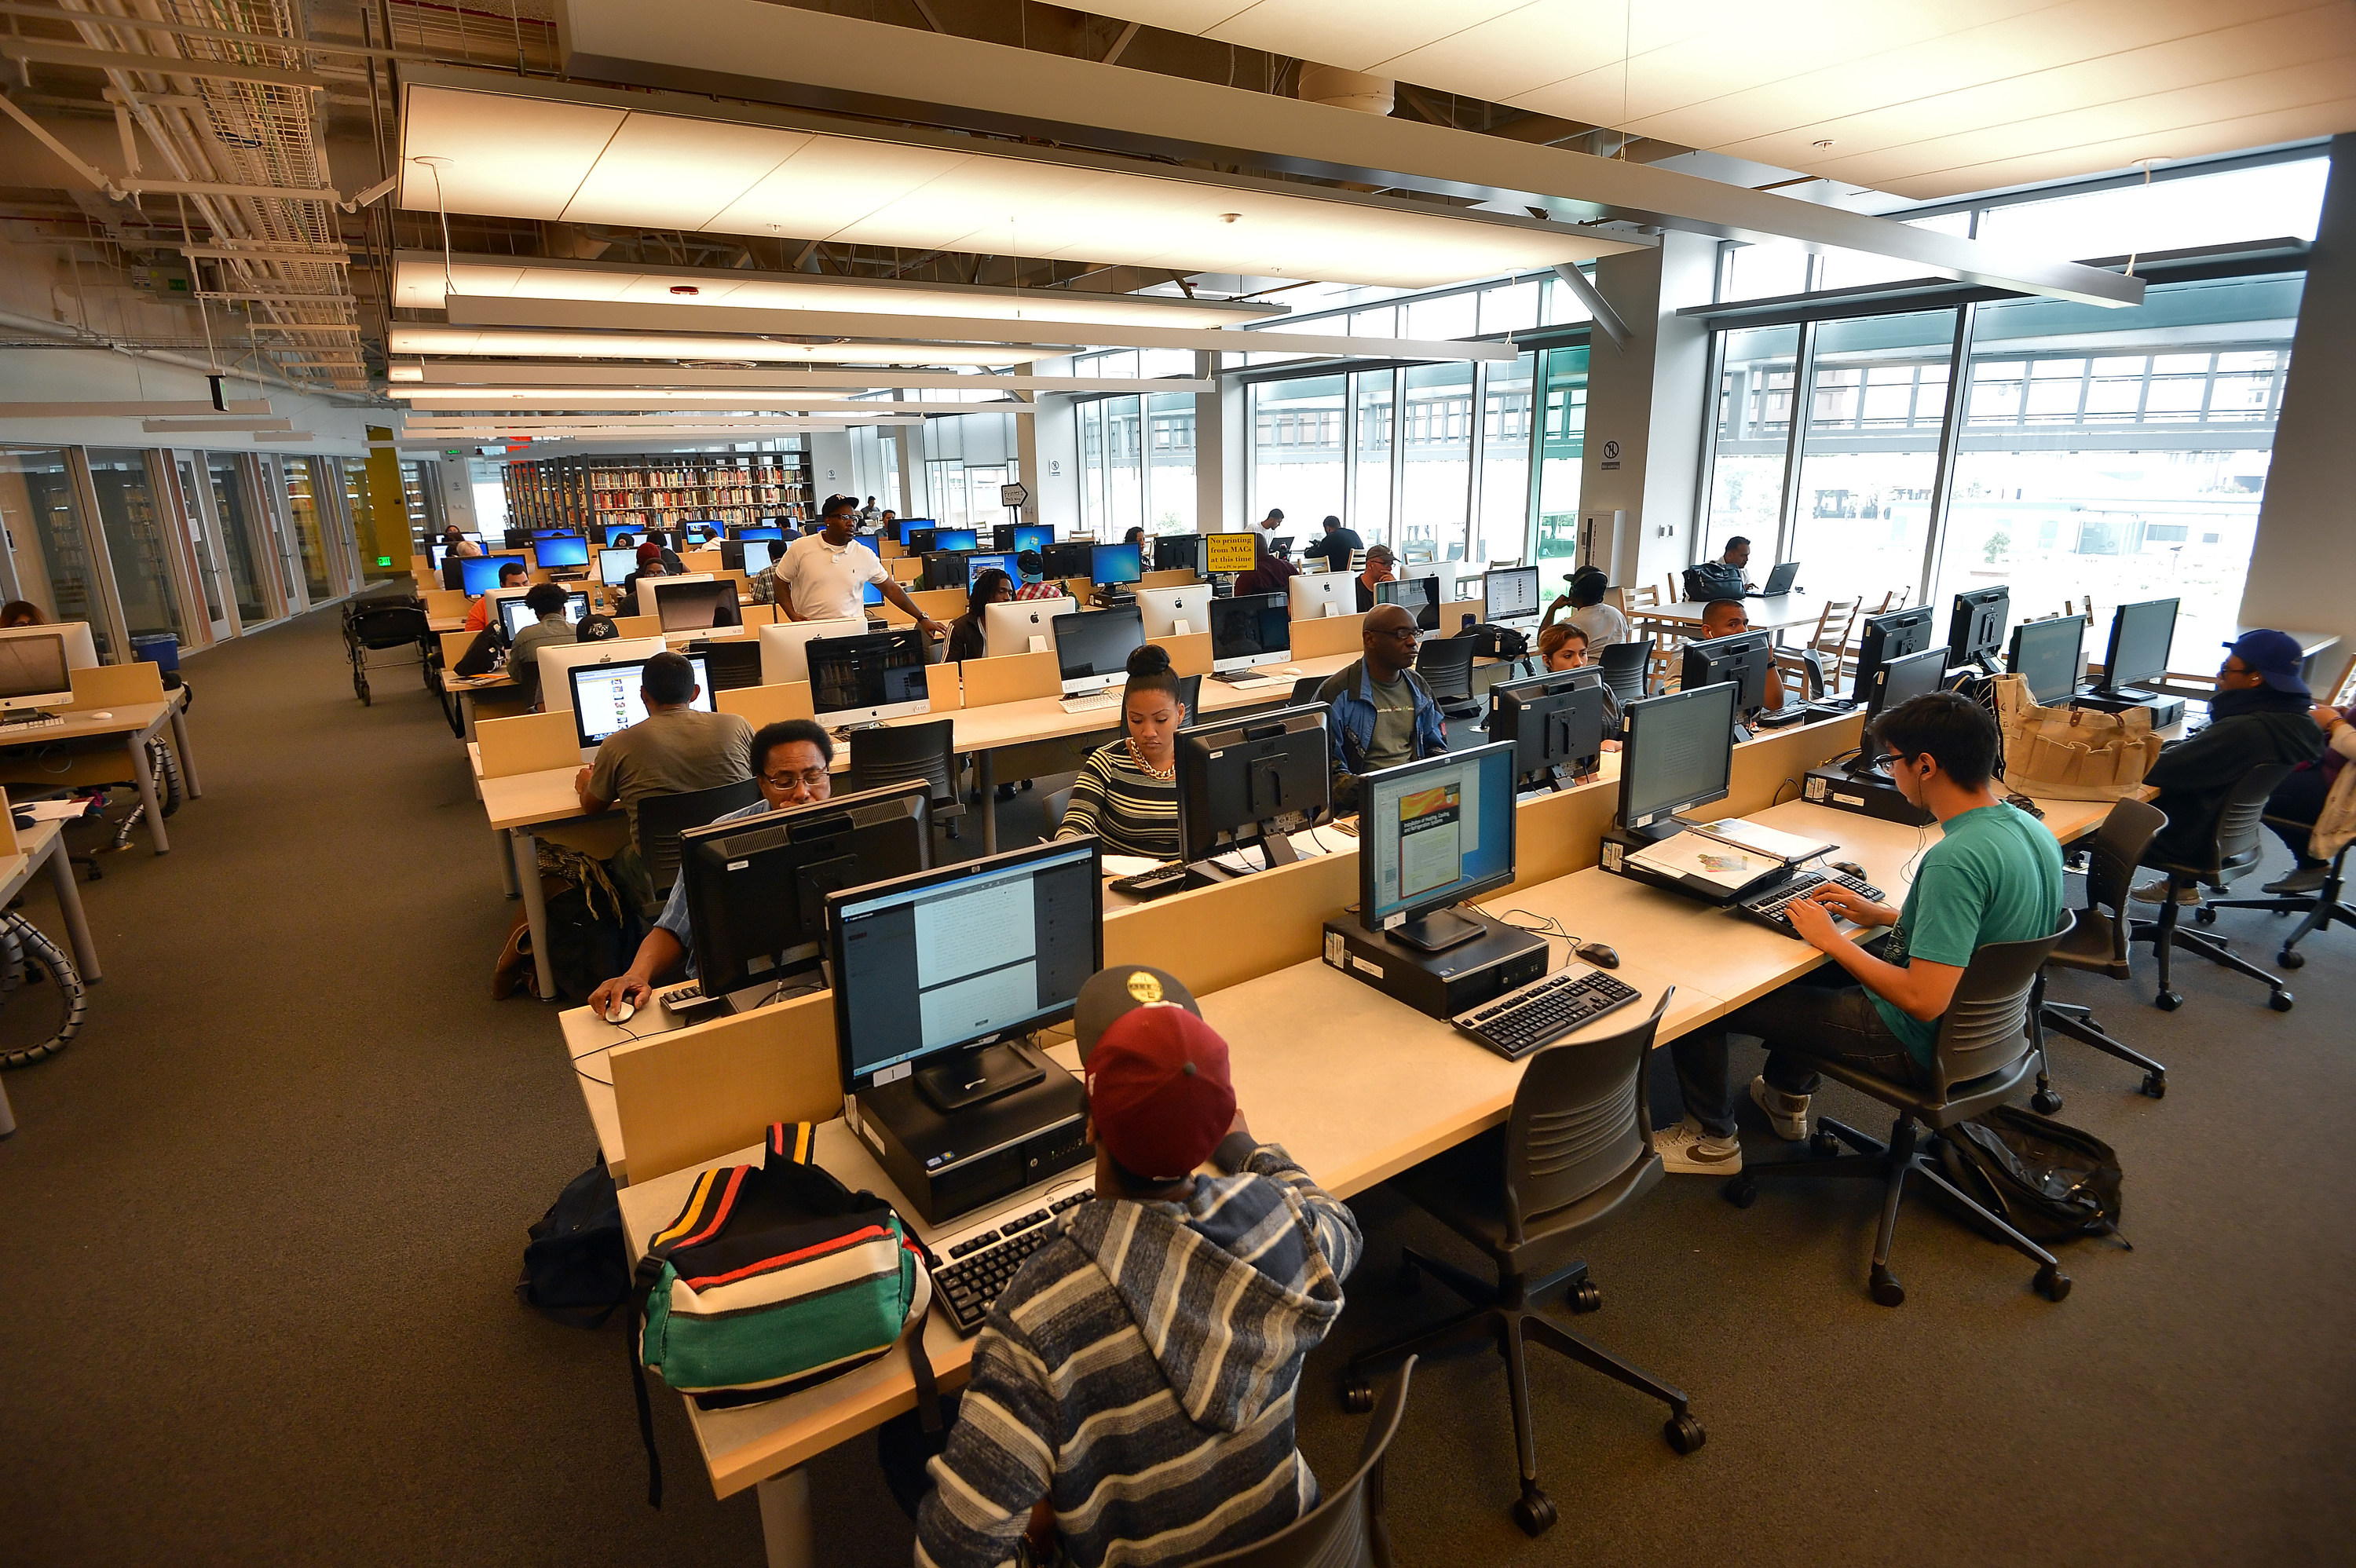 Students in Computer Lab